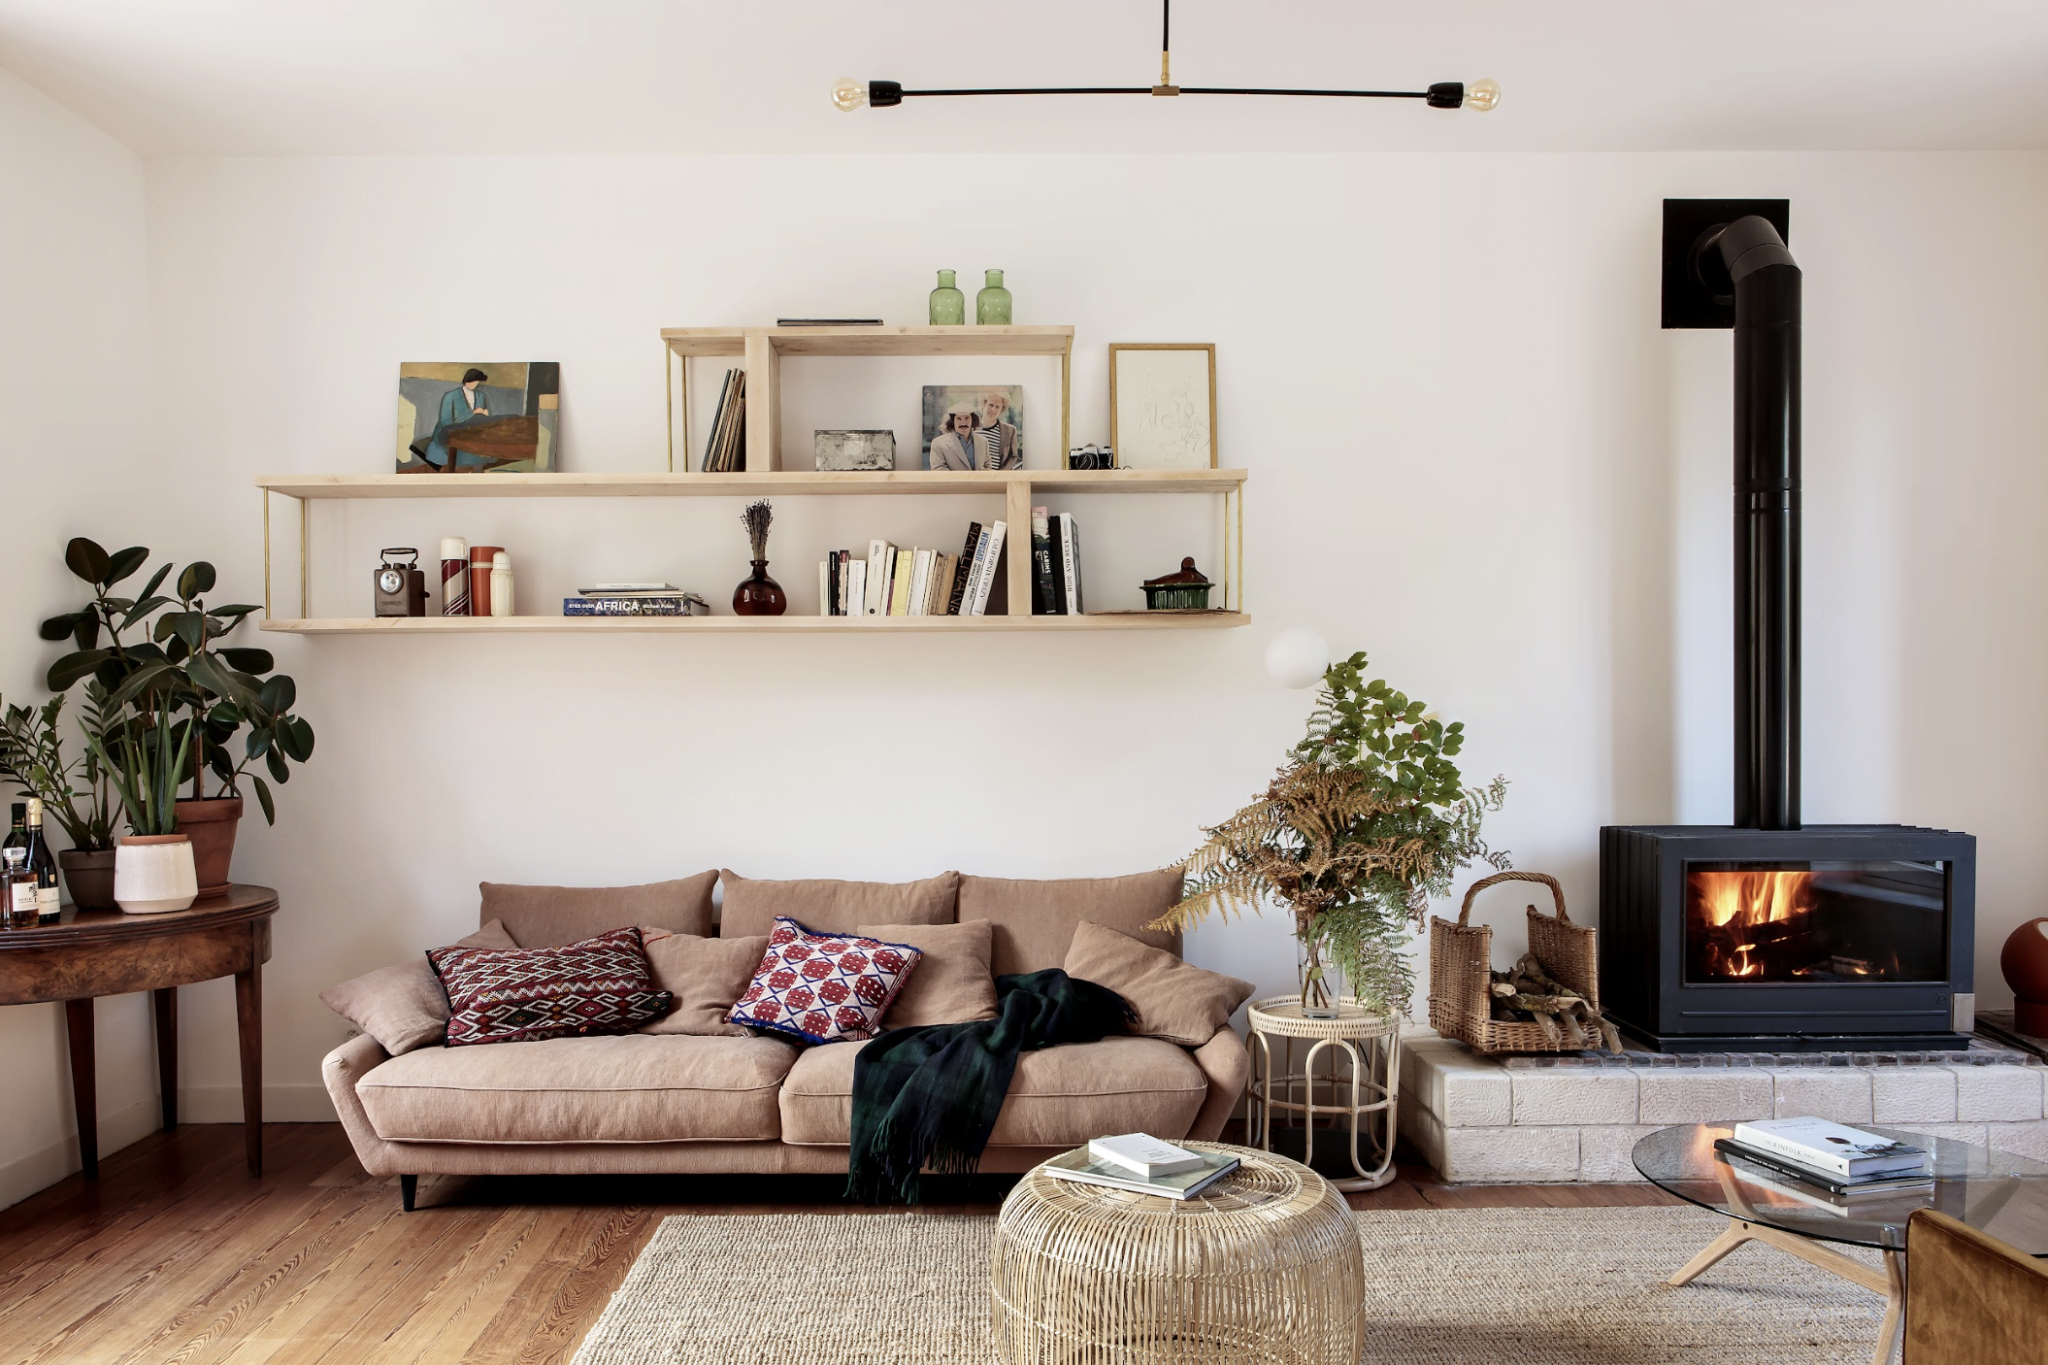 The Riverside House living room: pink sofa, white walls, wall-mounted bookcase, rattan rug.